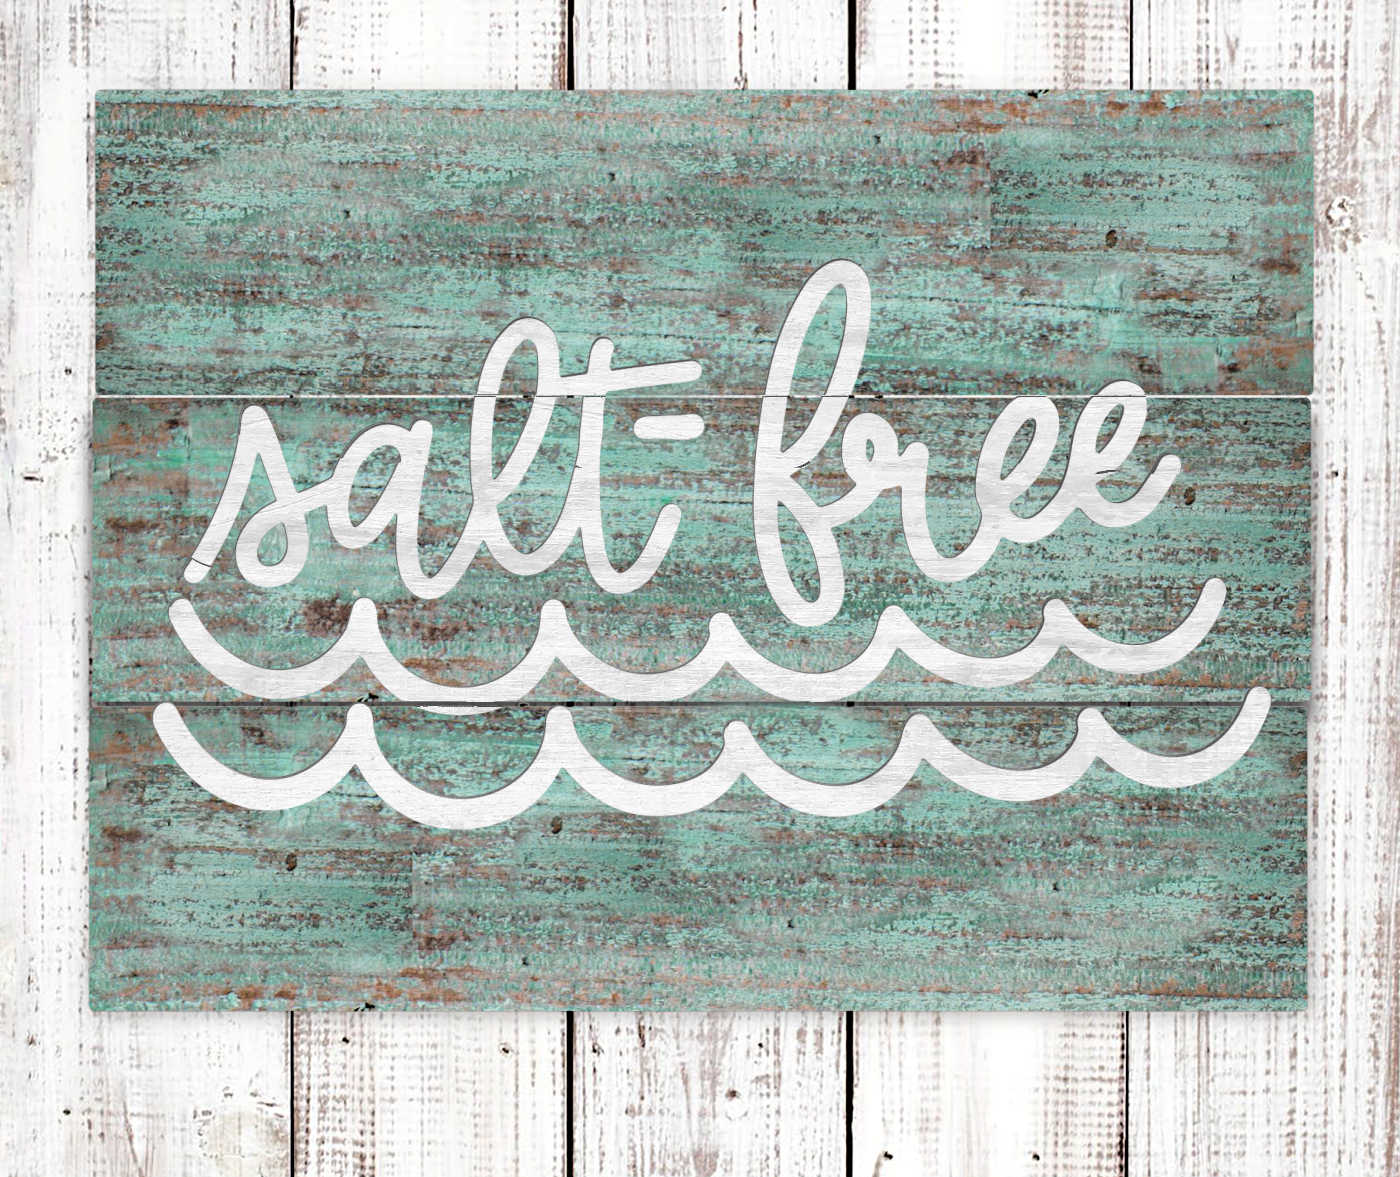 Weathered beach sign that says Salt-Free